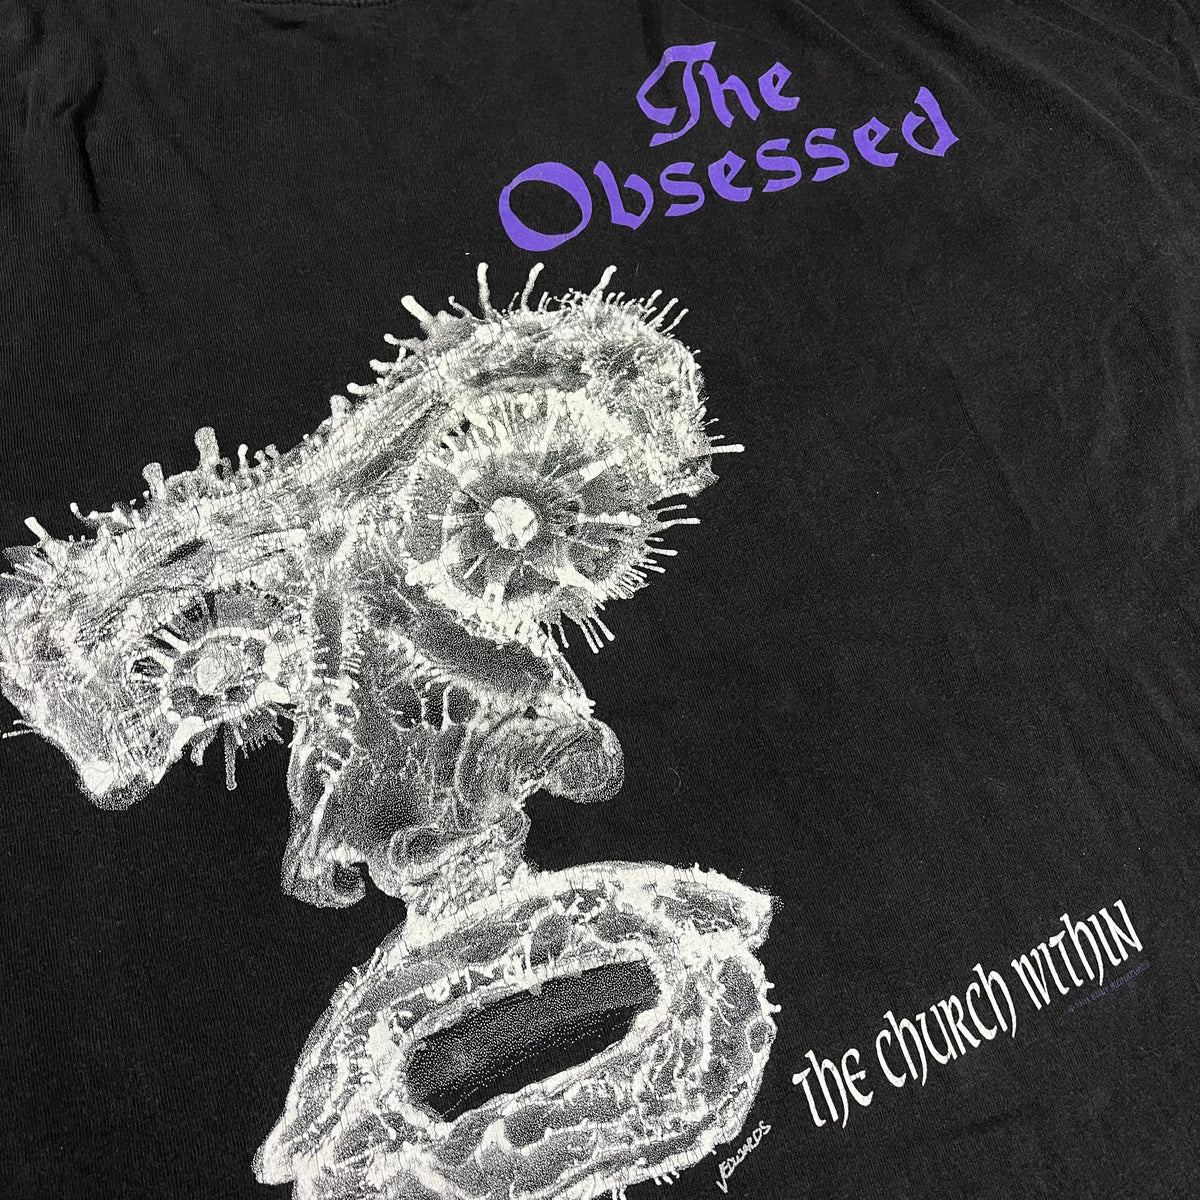 Vintage The Obsessed &quot;The Church Within&quot; T-Shirt